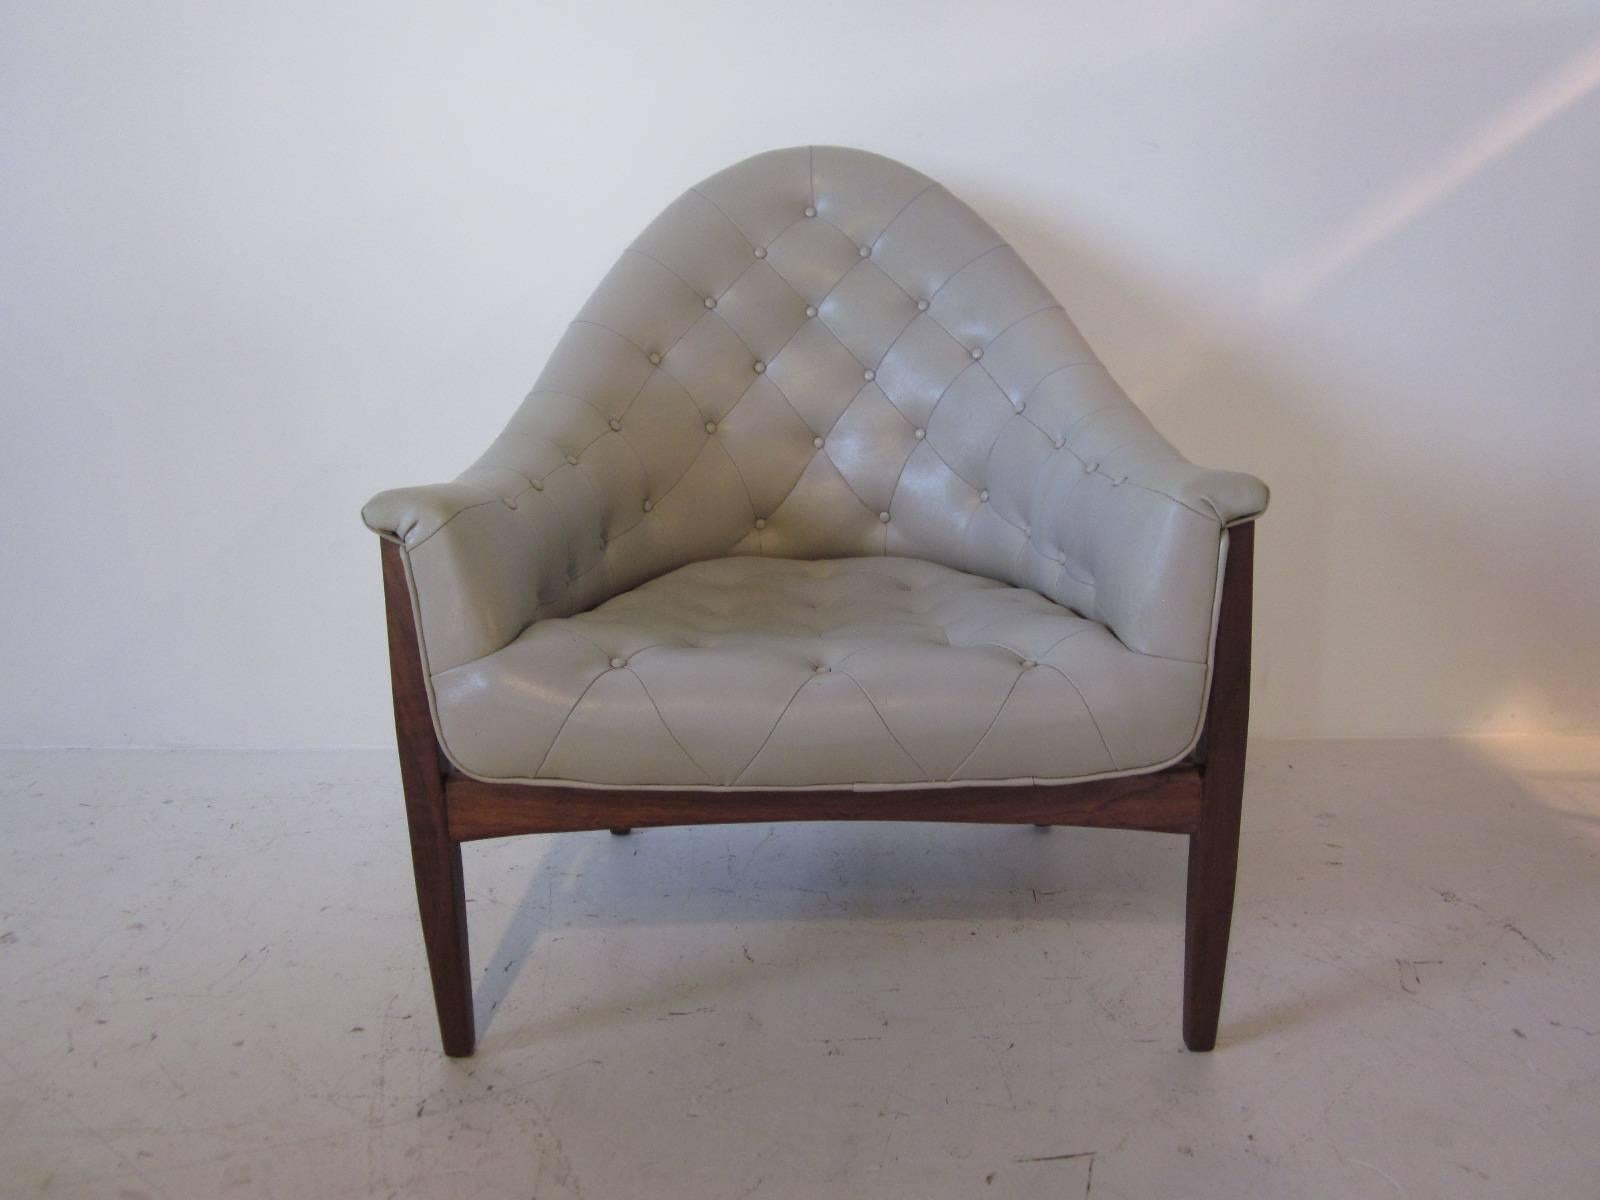 A tufted leatherette upholstered lounge chair sitting on a medium dark walnut frame, retains the manufactures tag Thayer Coggin Furniture company designed by Milo Baughman.